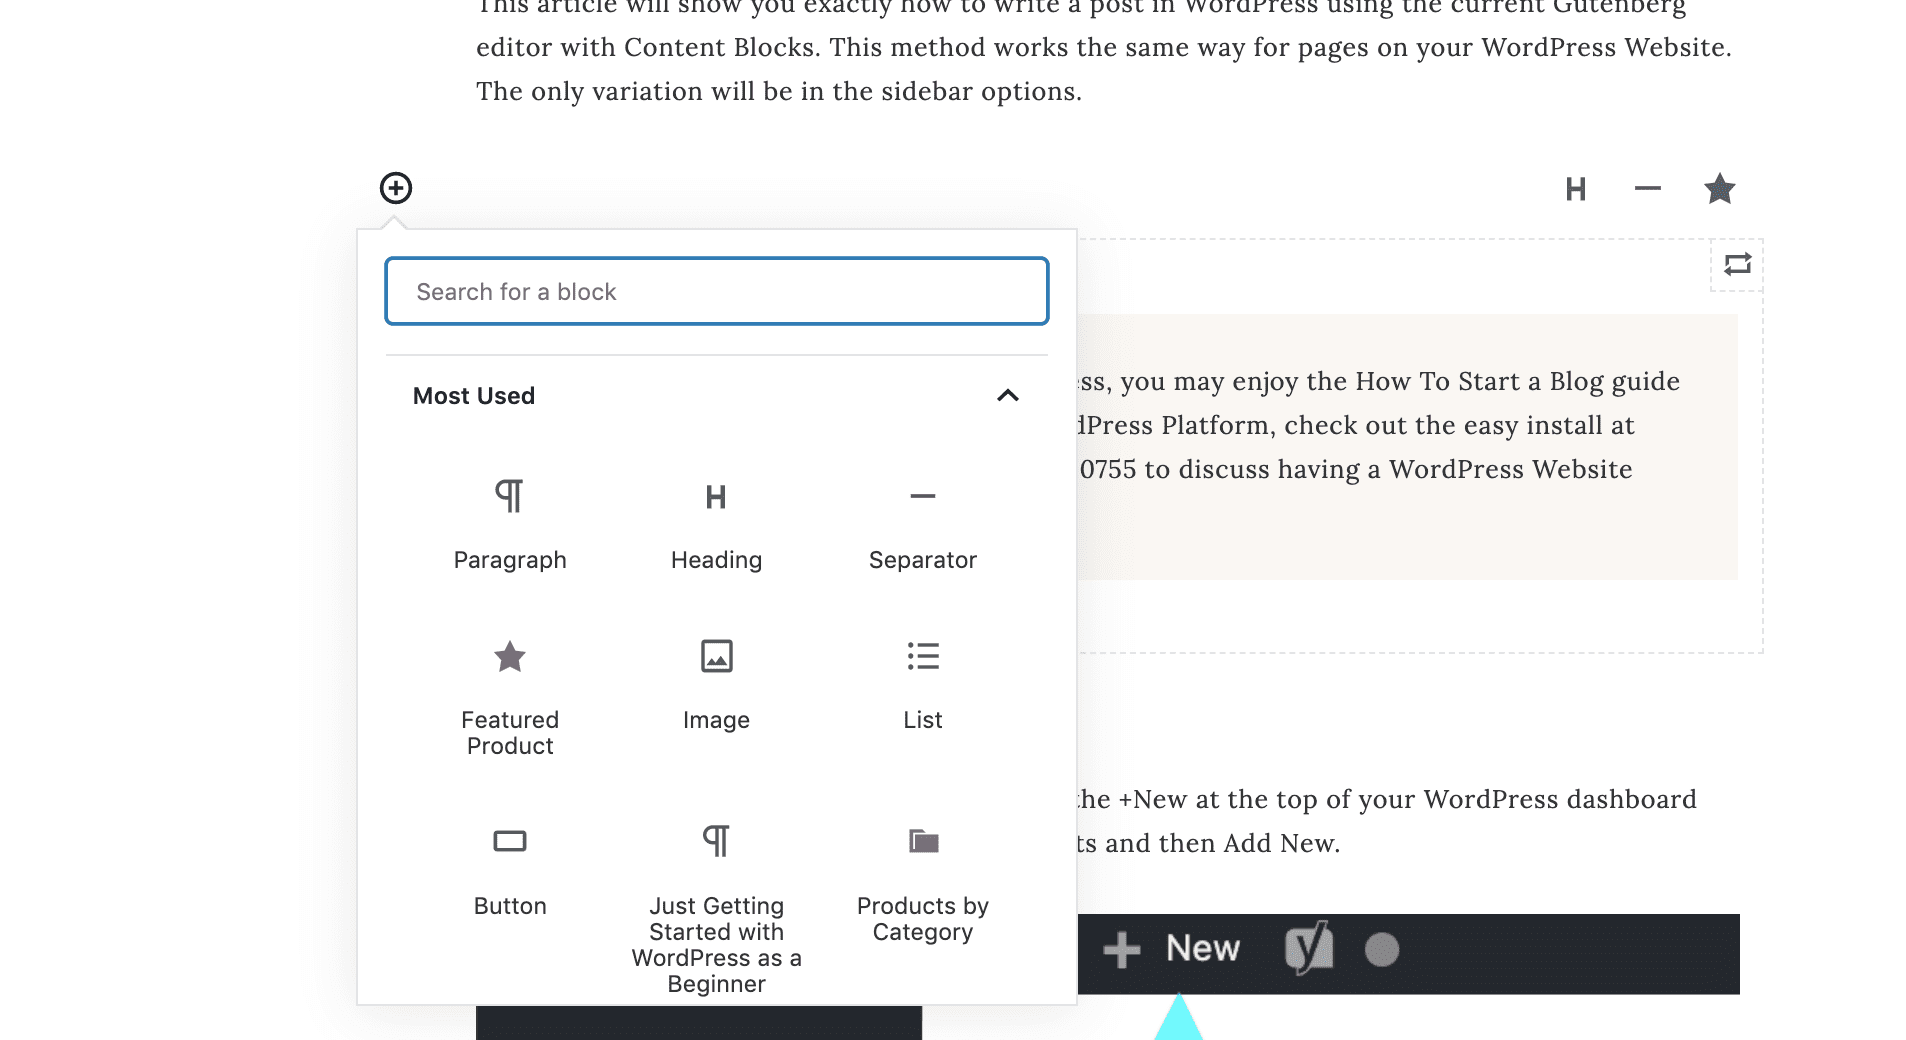 WordPress Gutenberg introduced Content blocks. These blocks allow us to drop in a new element for our blog in just 1 click of a button. 